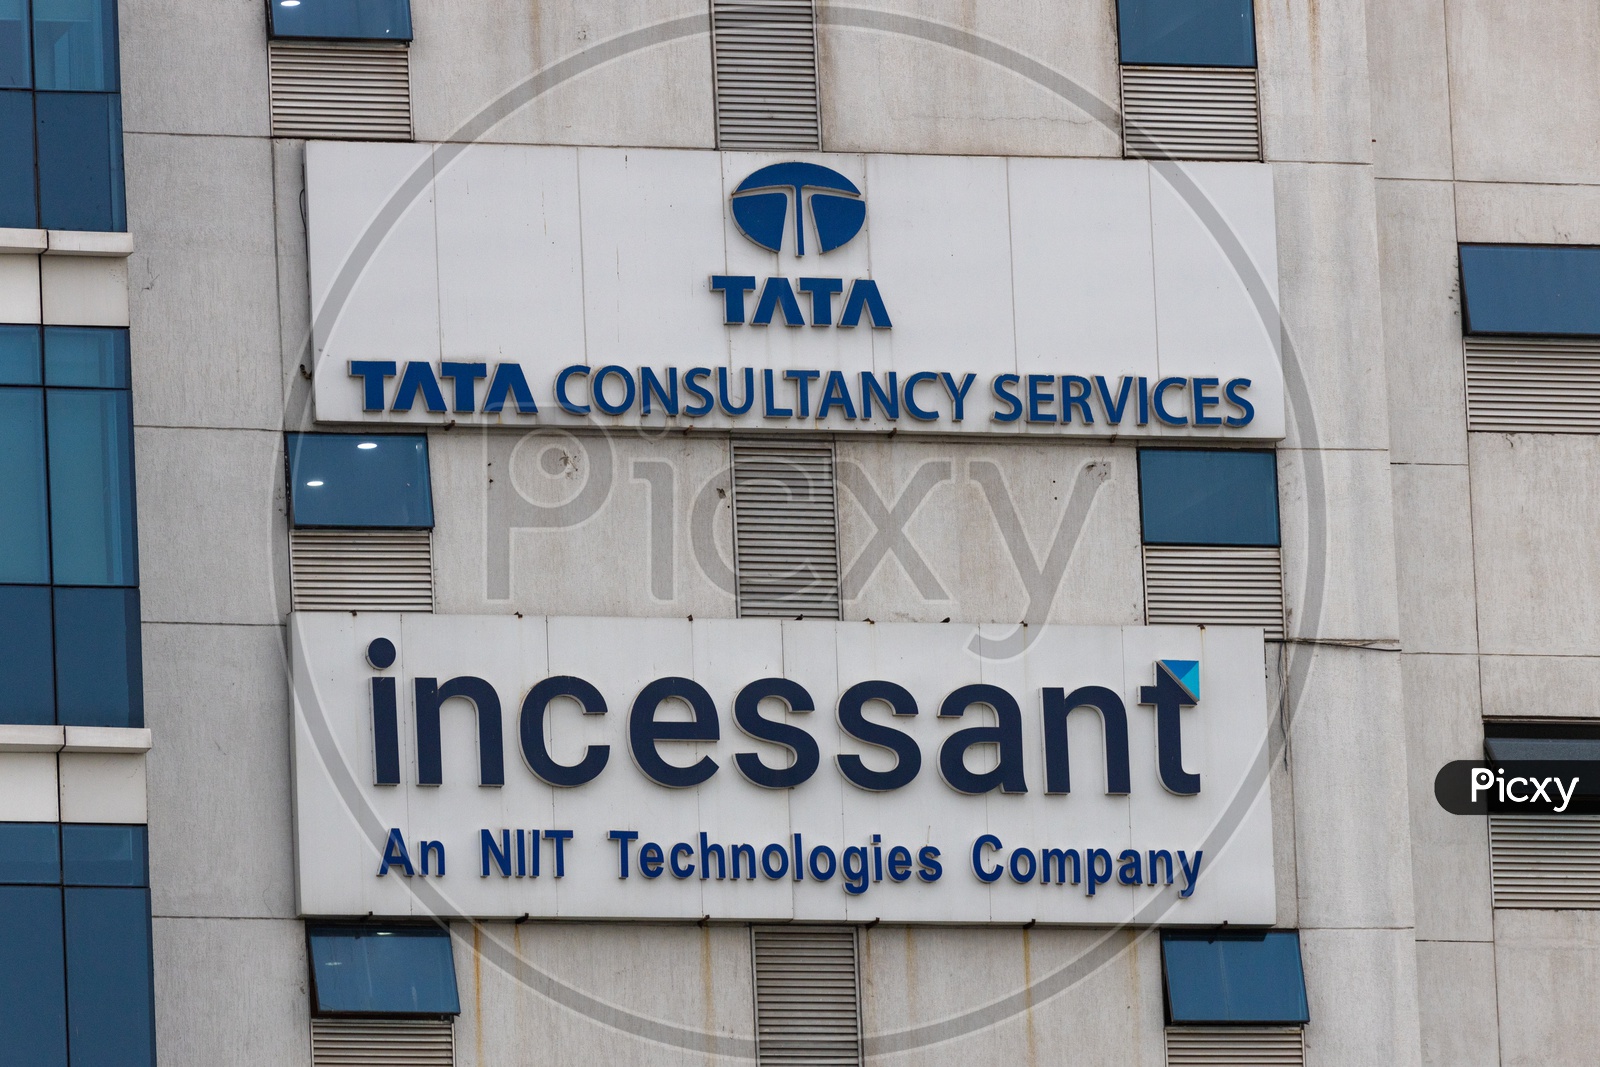 Tata Consultancy Services and Incessant NIIT Technologies Company offices in Q-City Park